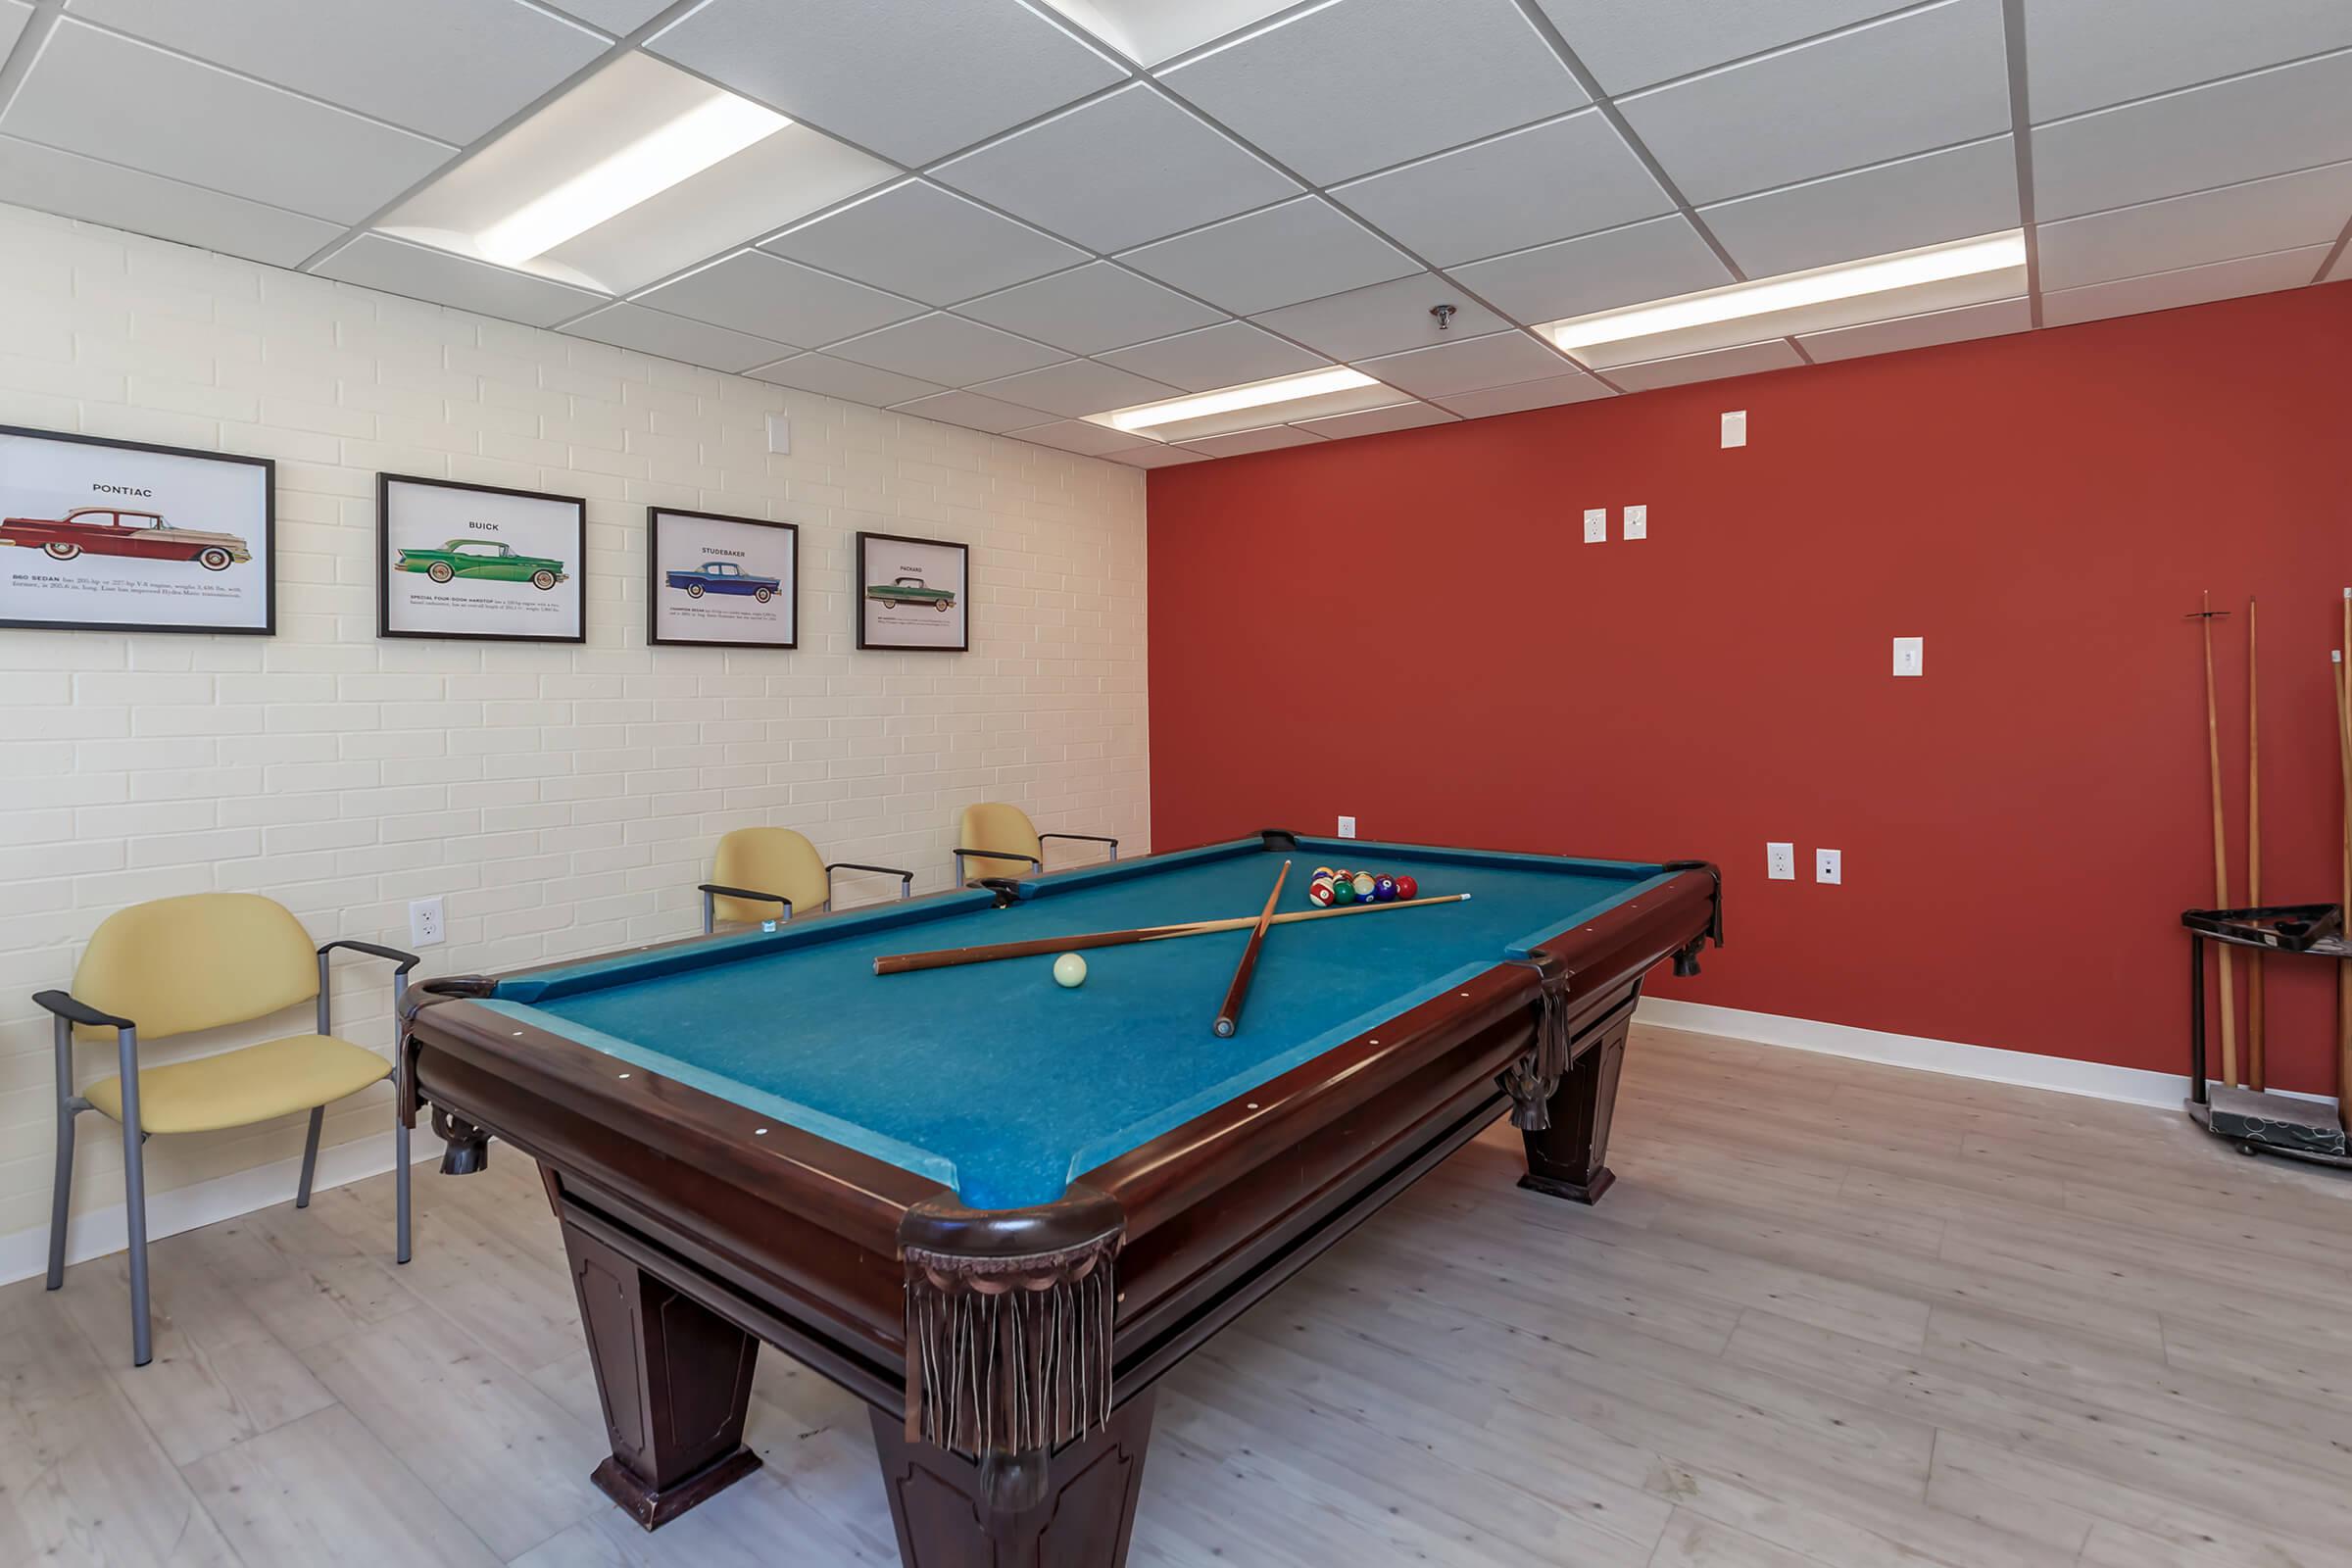 Linwood Square community room with a pool table